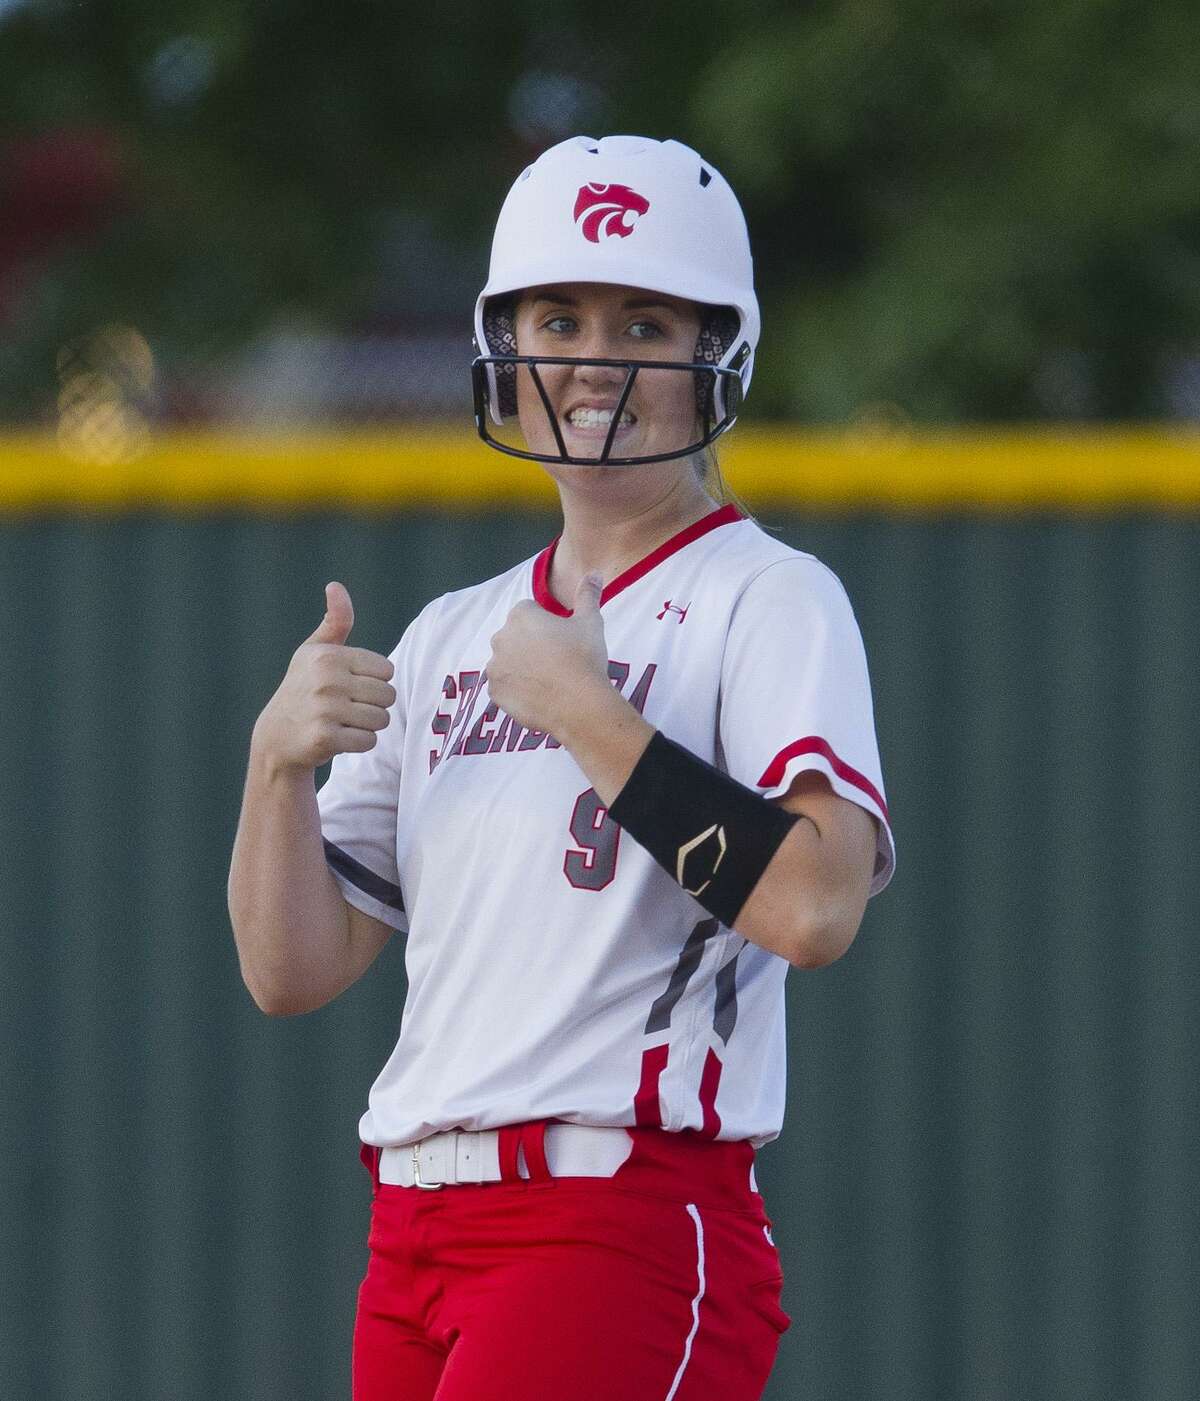 Gracie Bumpurs of Splendora gives a thumbs-up after hitting an RBI double in the third inning against Hardin-Jefferson on Friday.